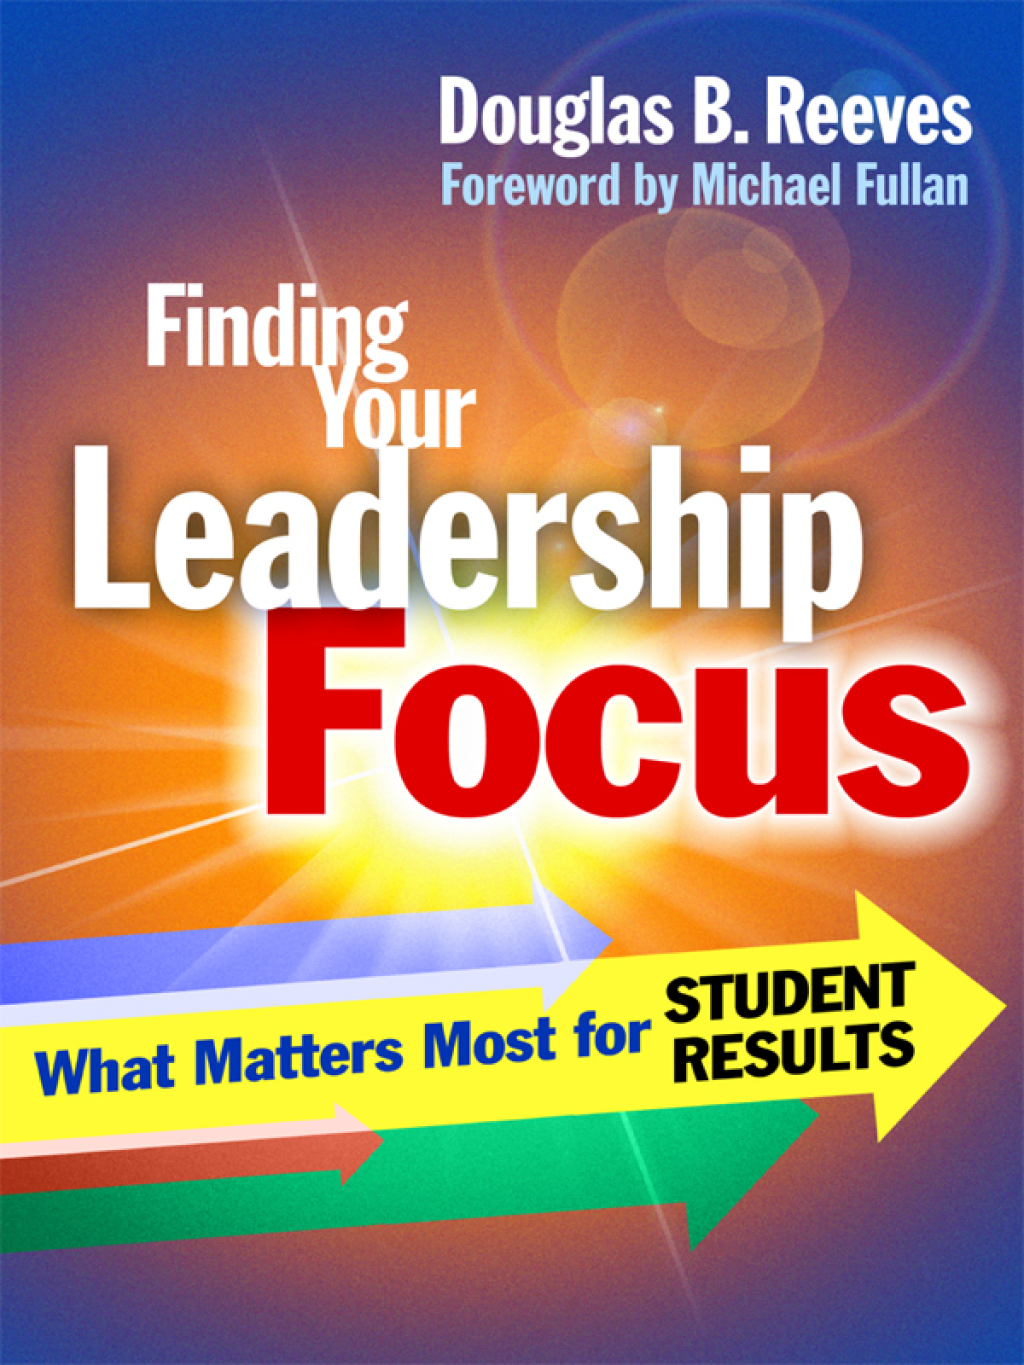 Finding Your Leadership Focus: What Matters Most for Student Results (eBook) - Douglas B. Reeves,